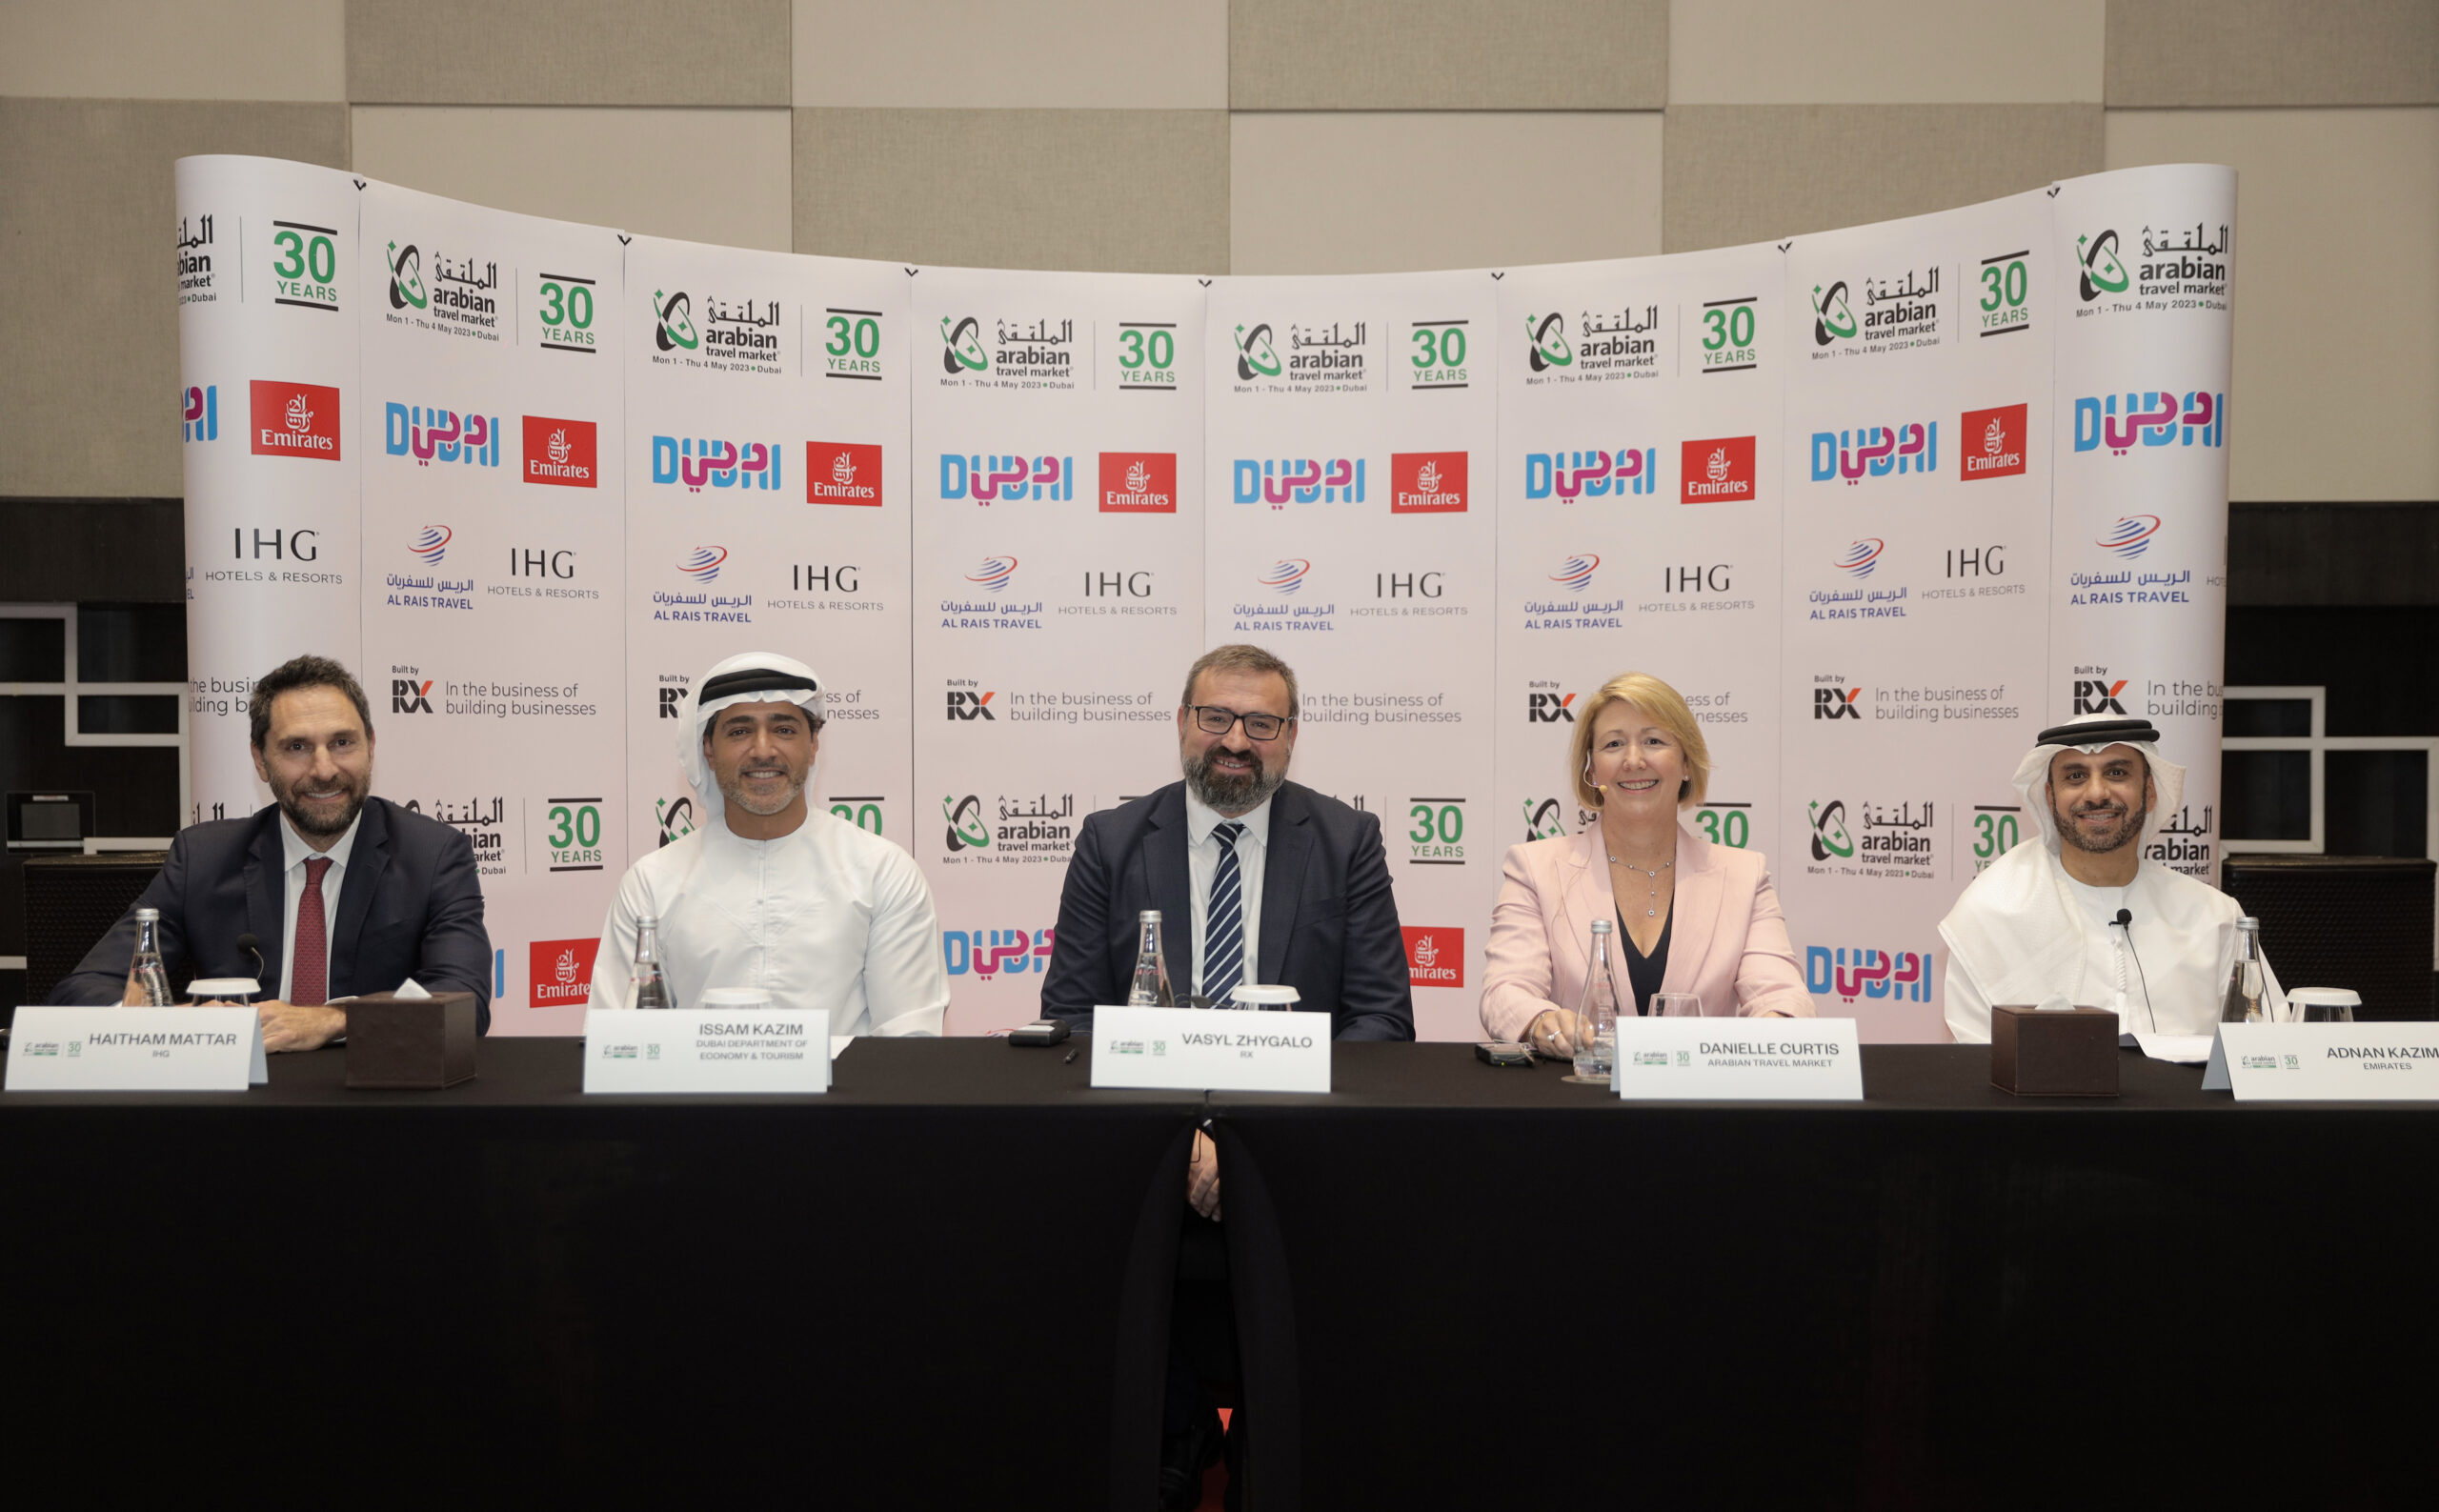 Arabian Travel Market to welcome over 2,000 exhibitors, representatives from more than 150 countries and an expected 34,000 attendees to Dubai